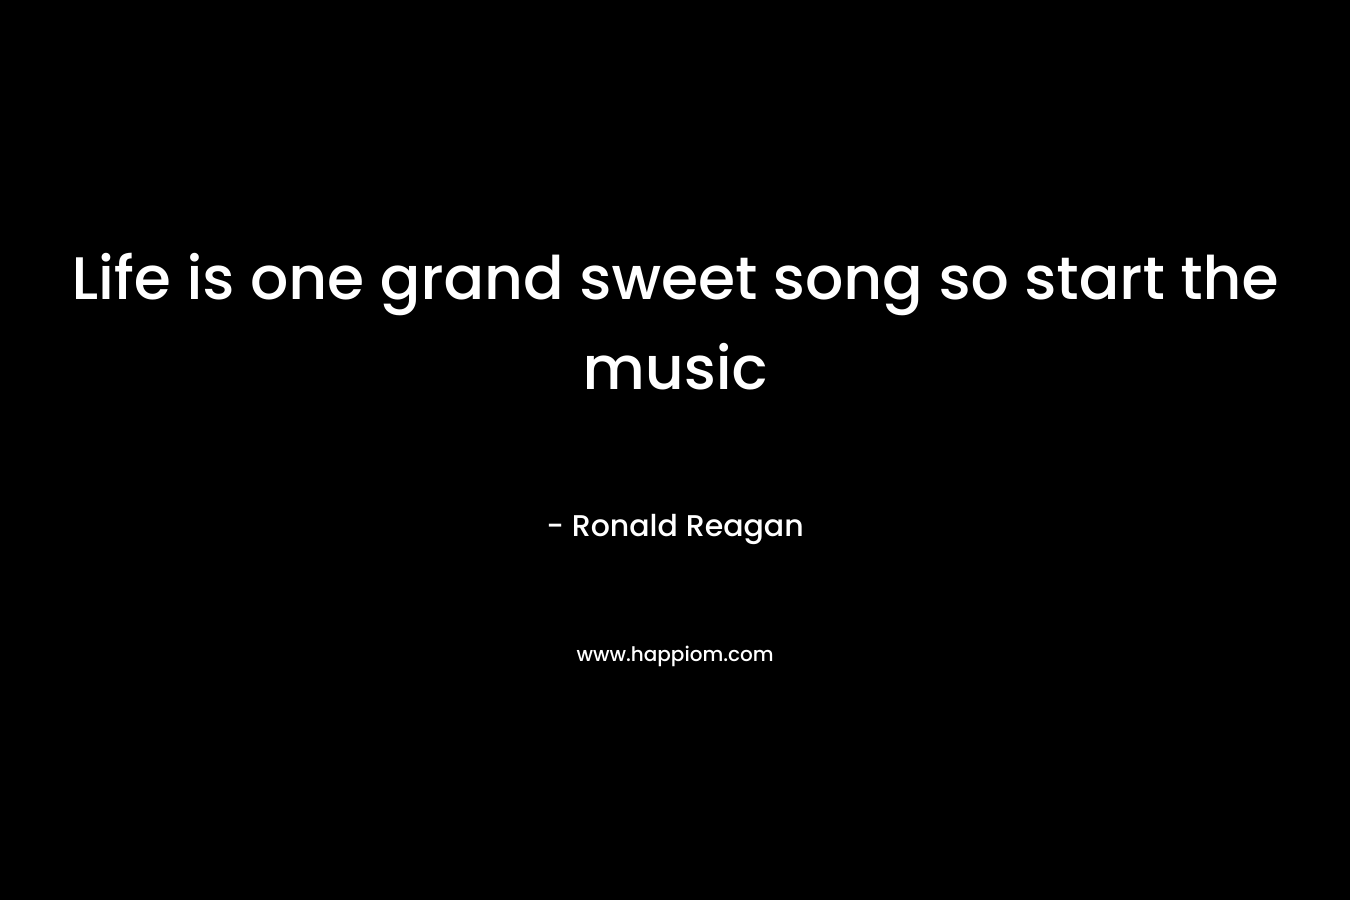 Life is one grand sweet song so start the music